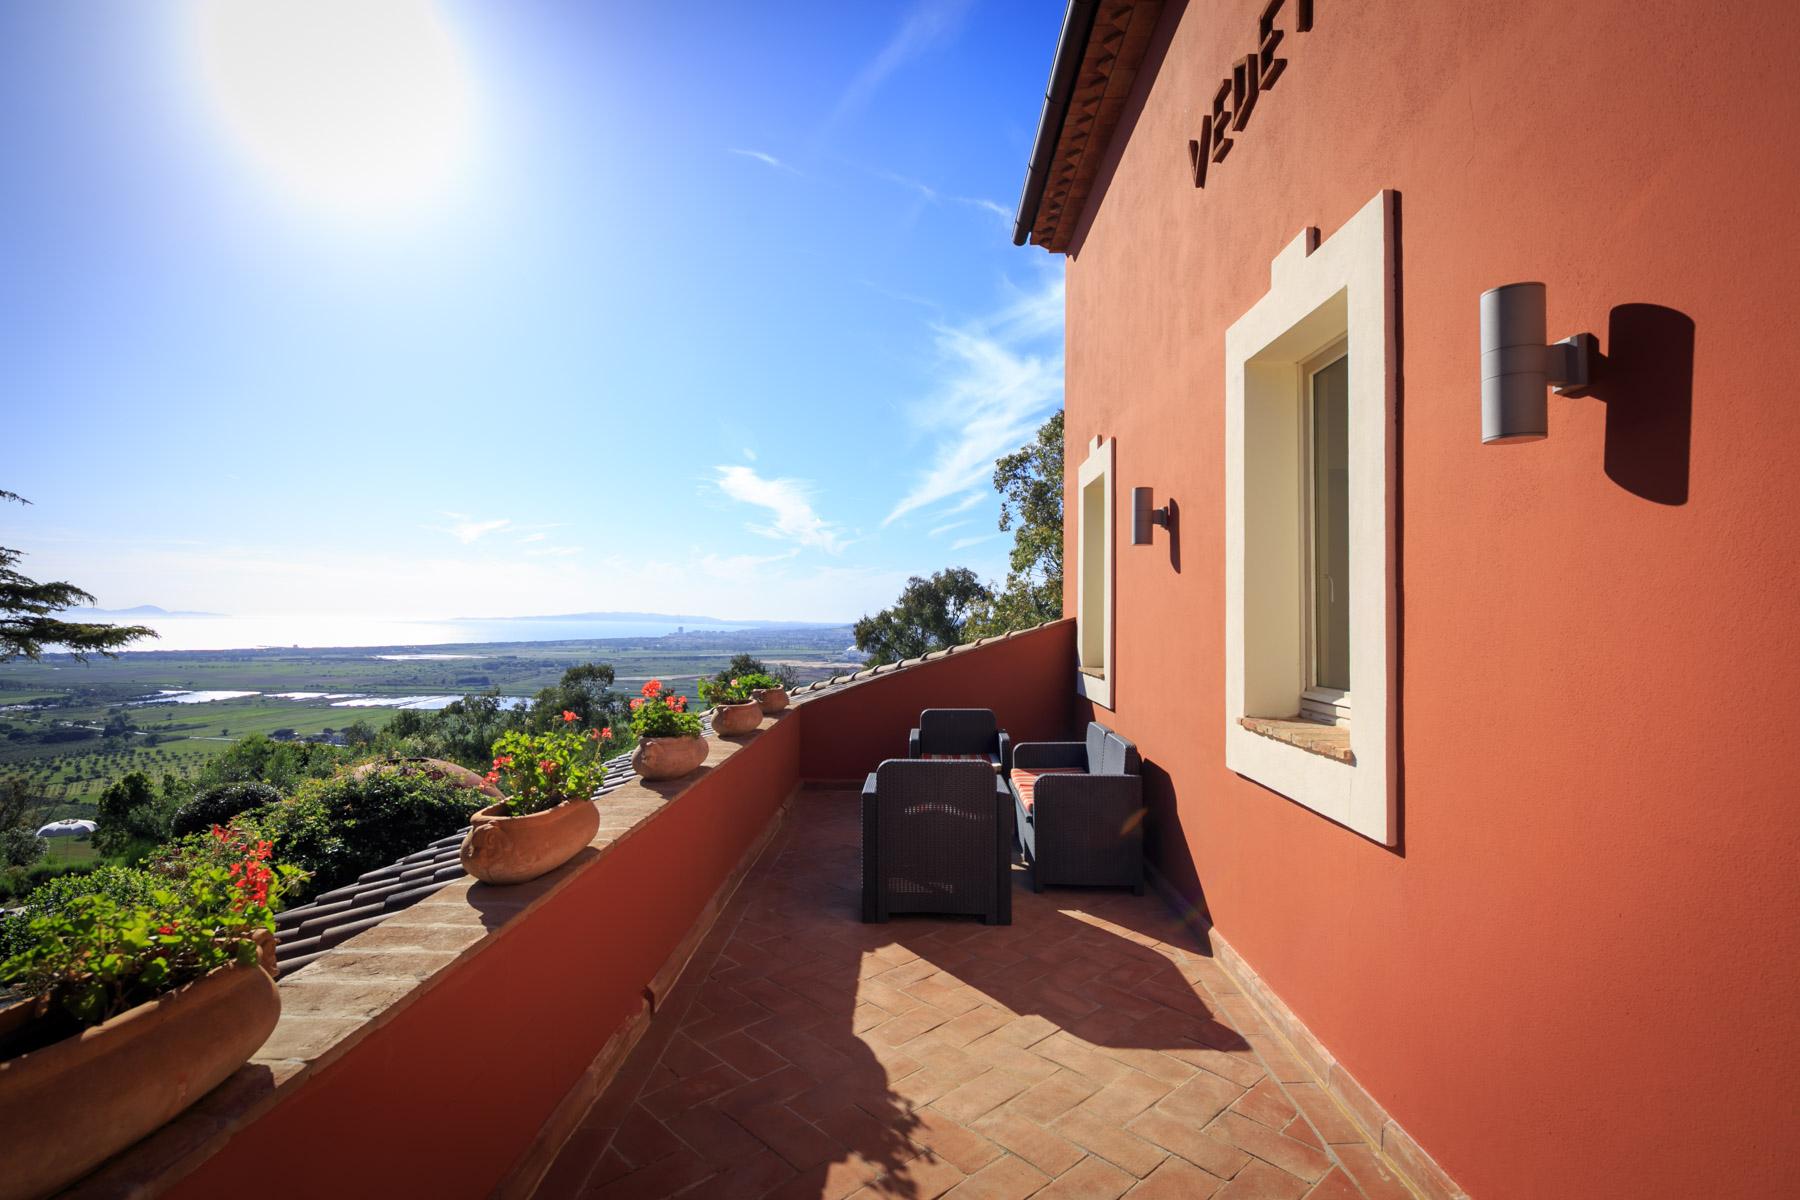 Historic Villa with stunning views over the Gulf of Scarlino - 33